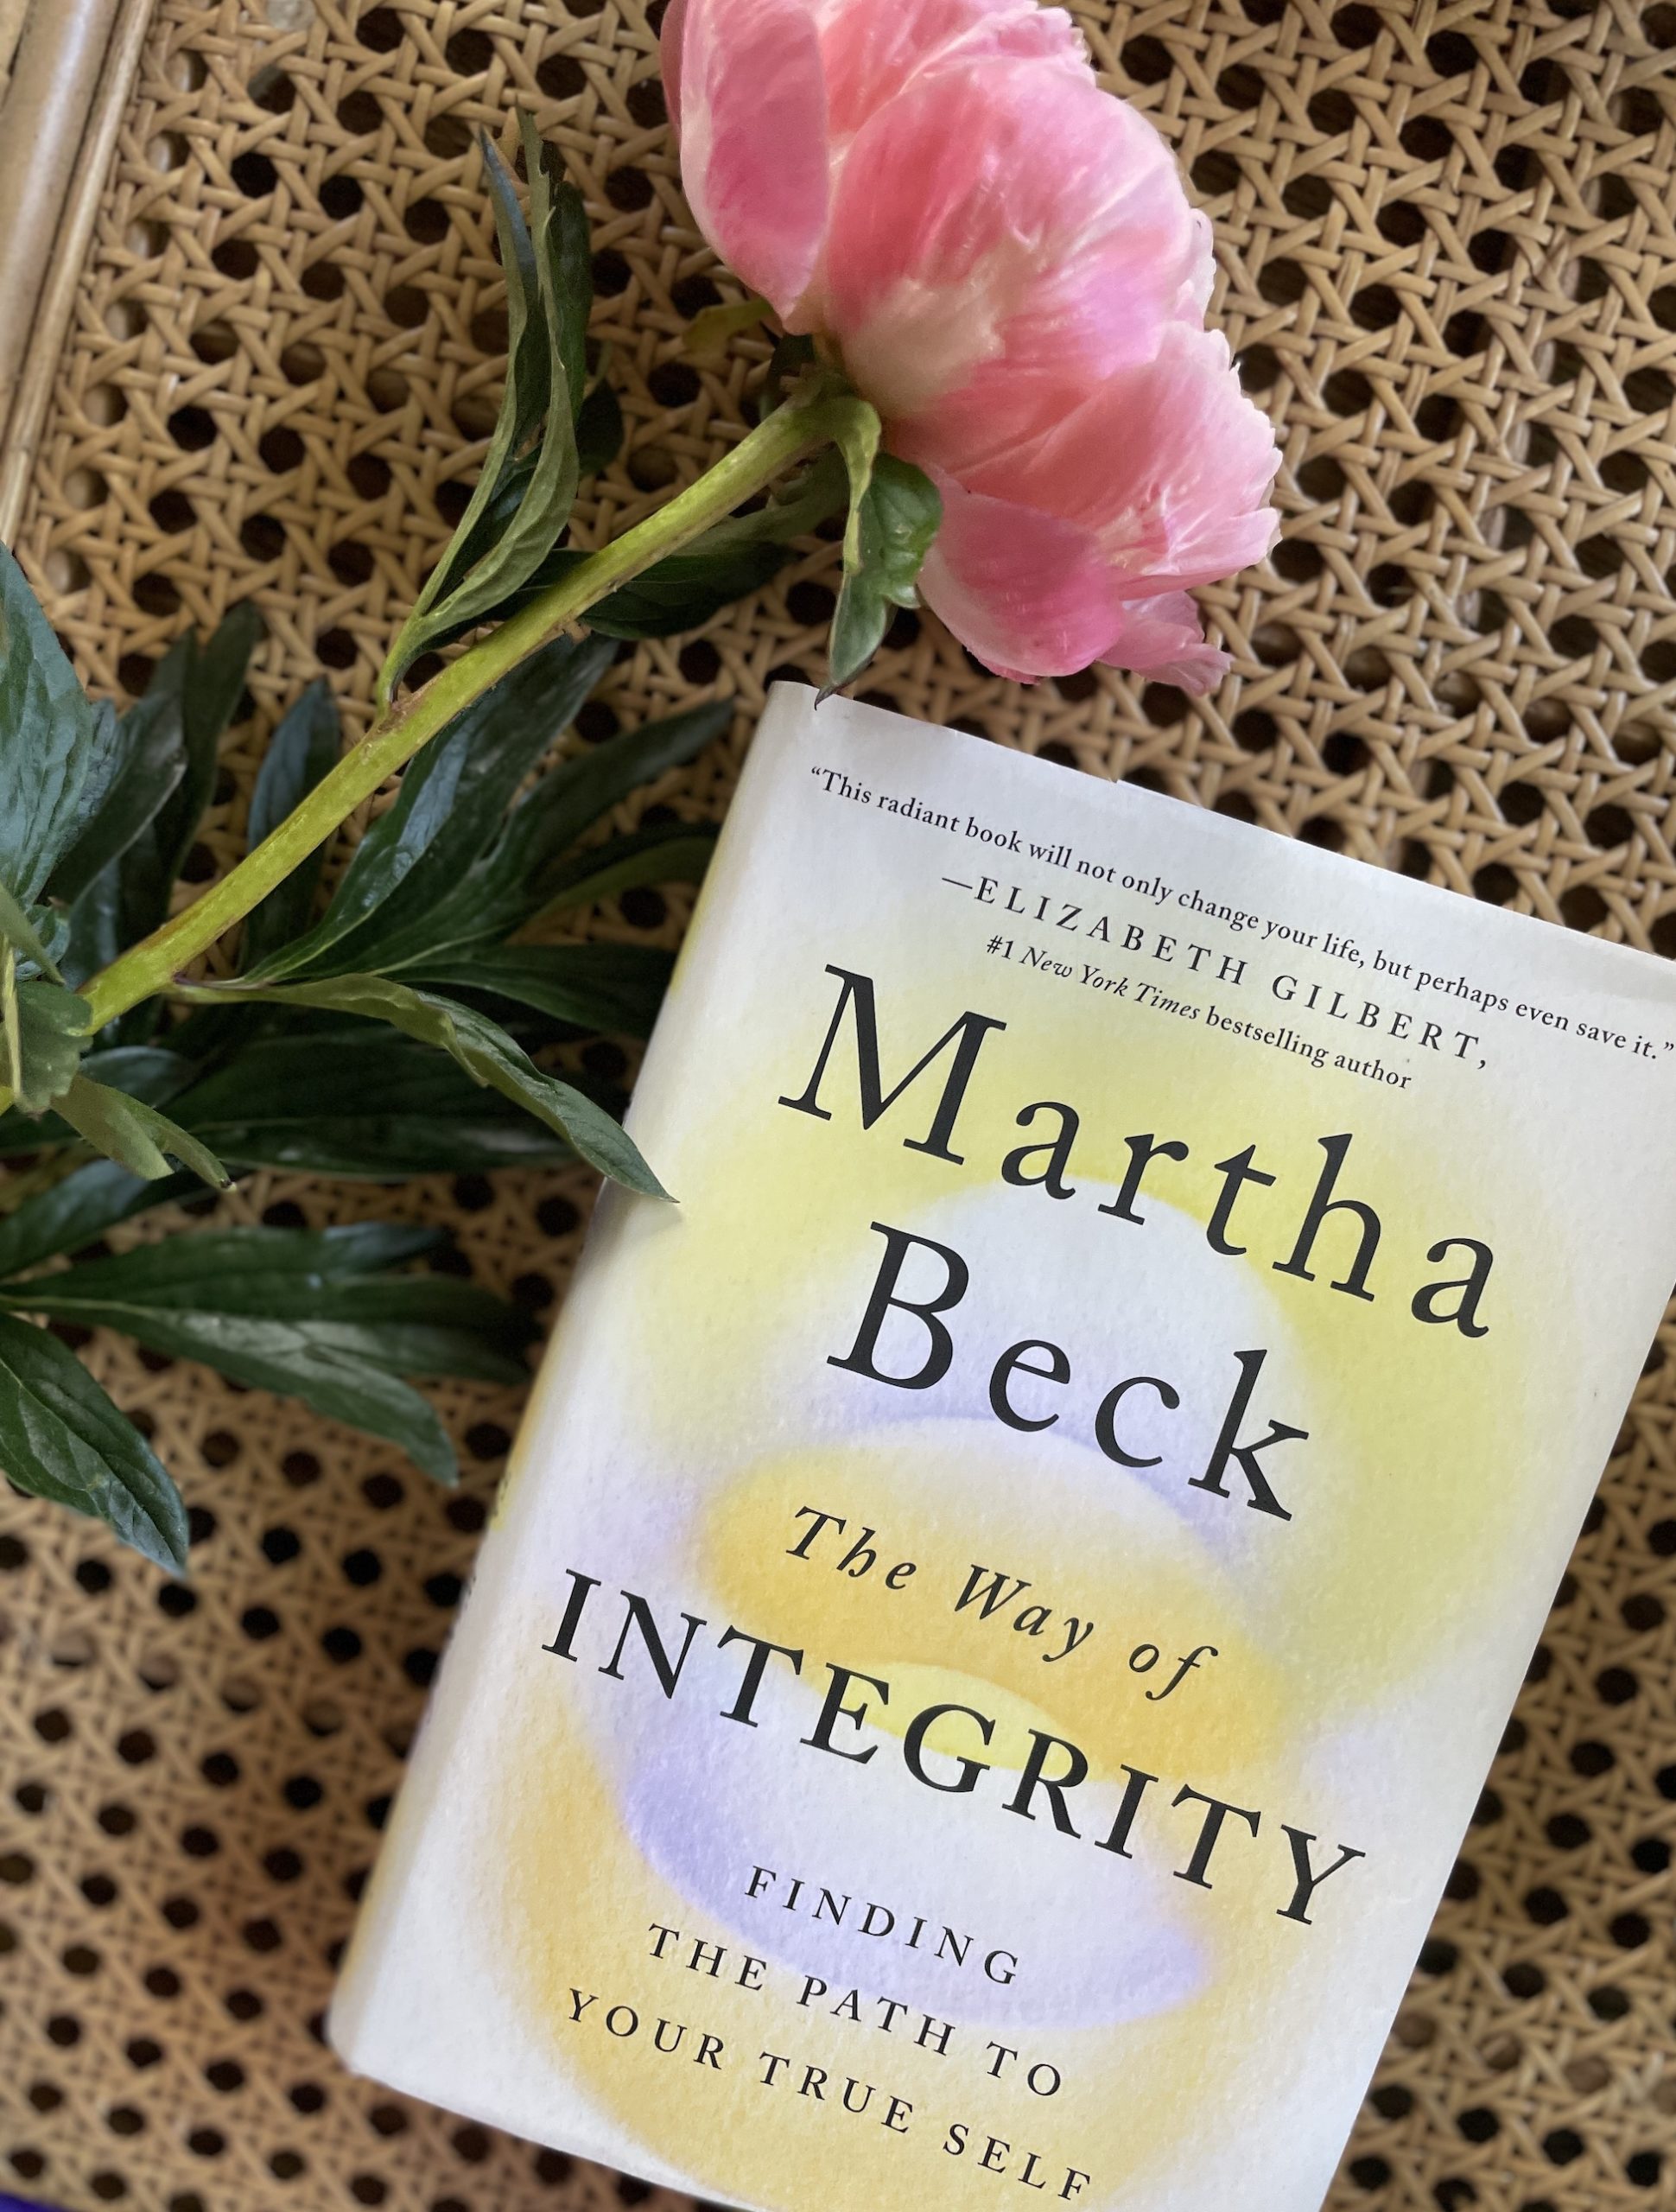 307: How to Step into your Fullest True Self — The Way of Integrity, as taught by Martha Beck